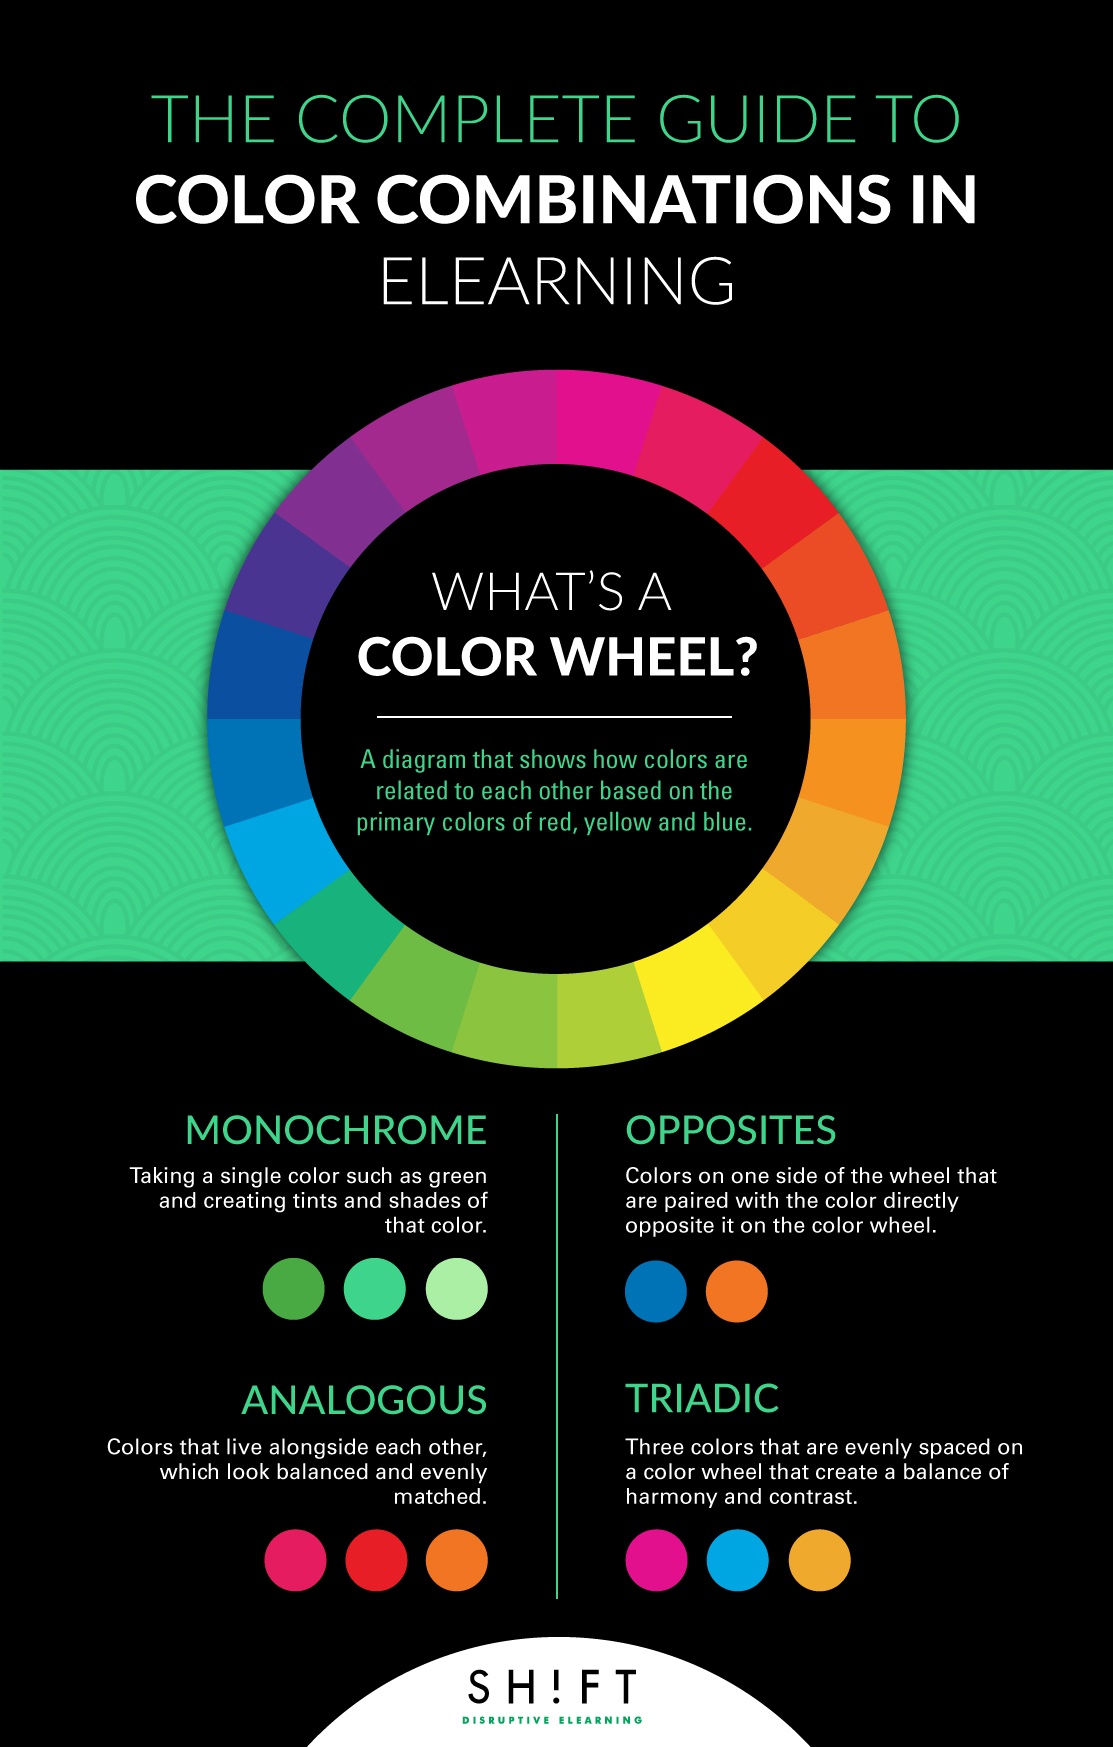 The Circular Chart Used To Remember Color Relationships Is A